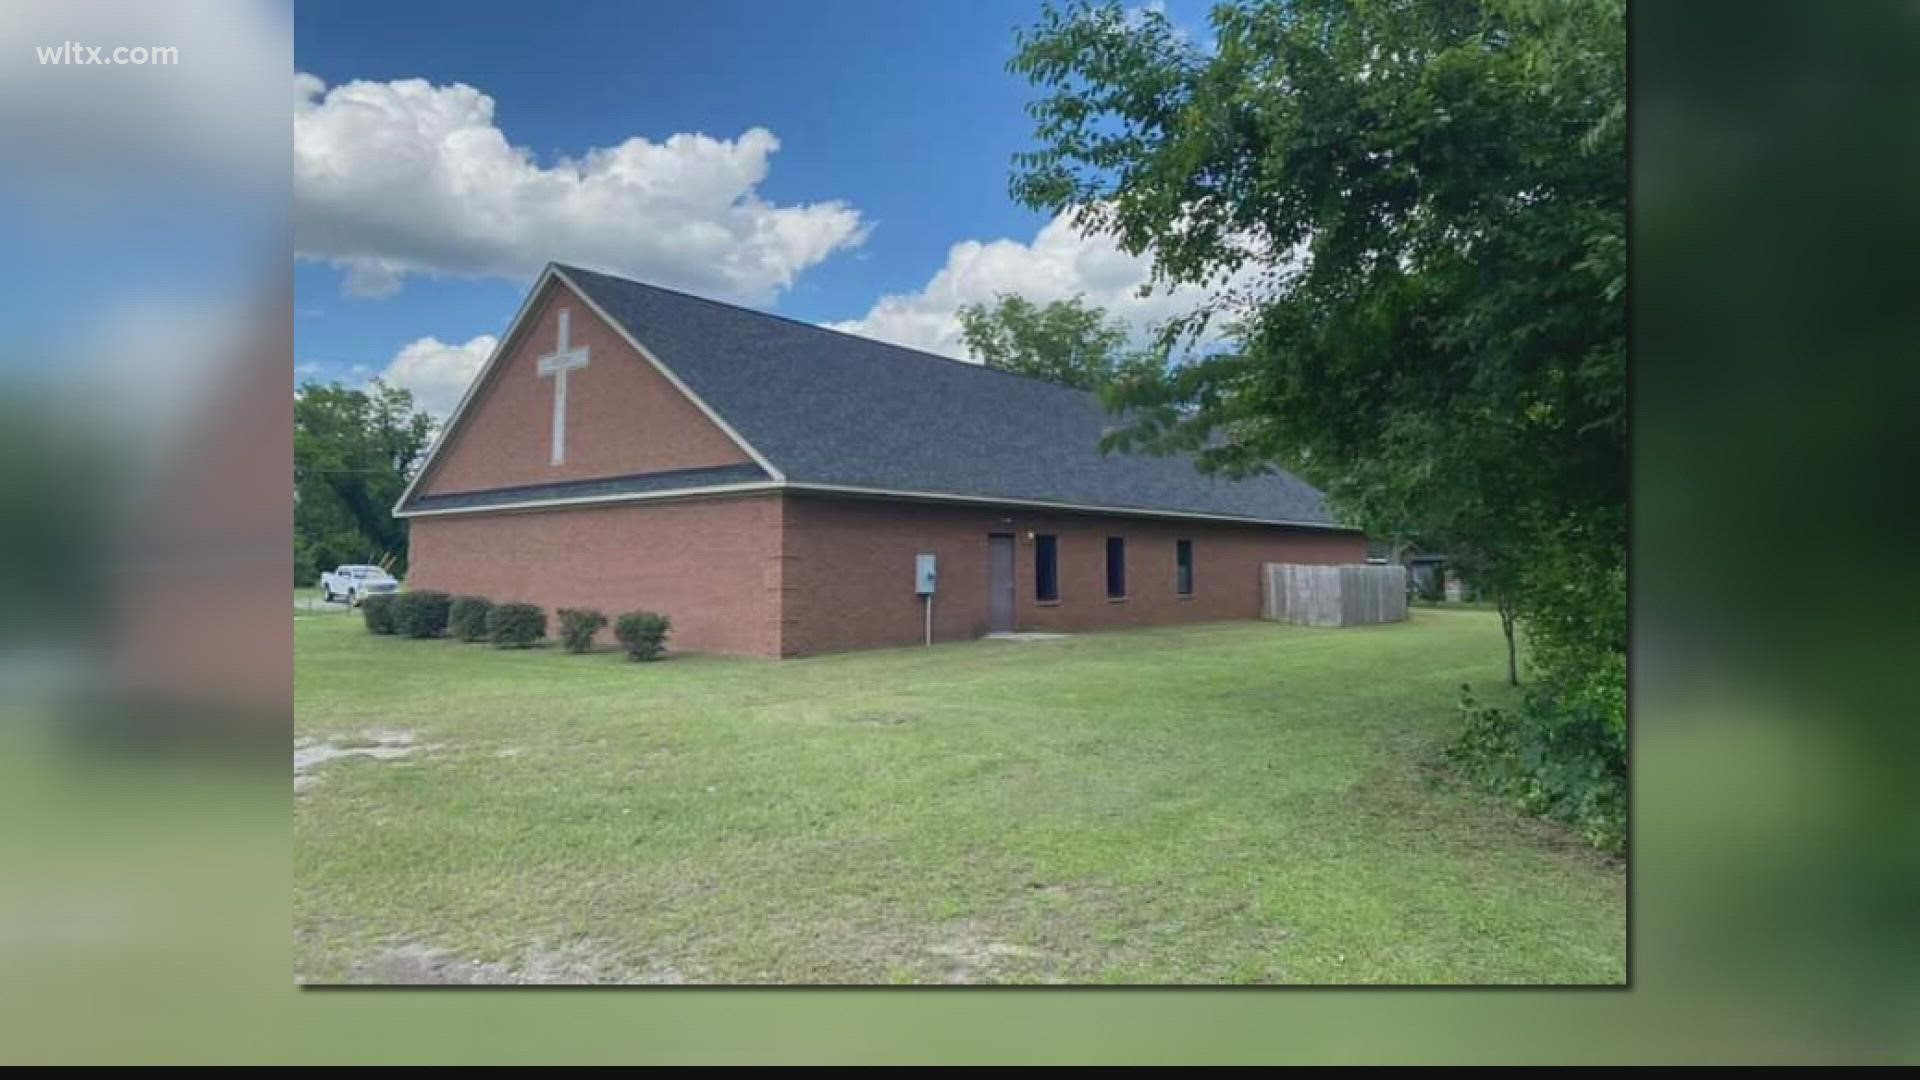 A Midlands church found a new home in an abandoned Sumter sanctuary after years of searching for the right place - and the right price.